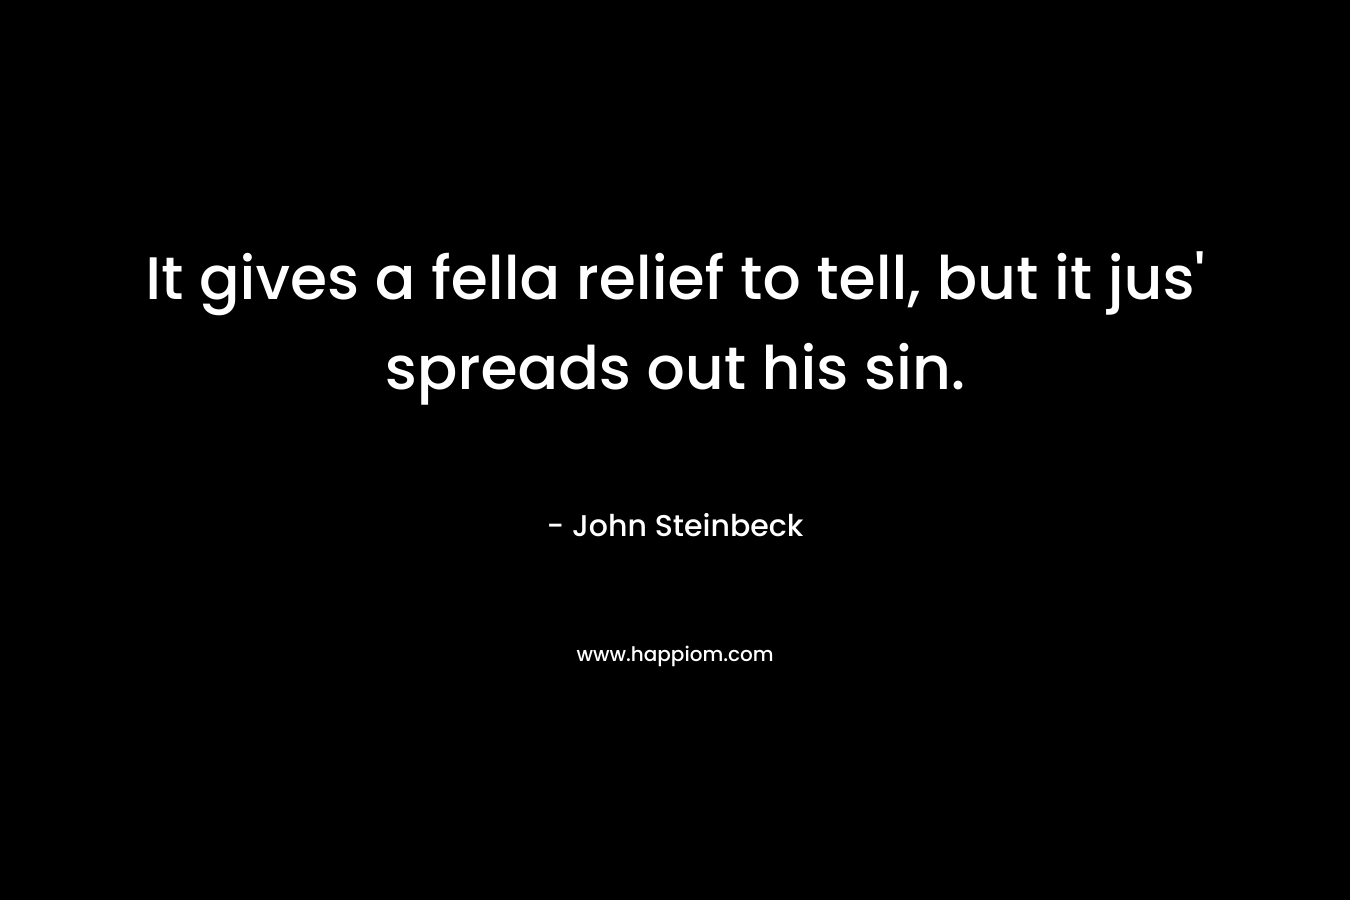 It gives a fella relief to tell, but it jus’ spreads out his sin. – John Steinbeck